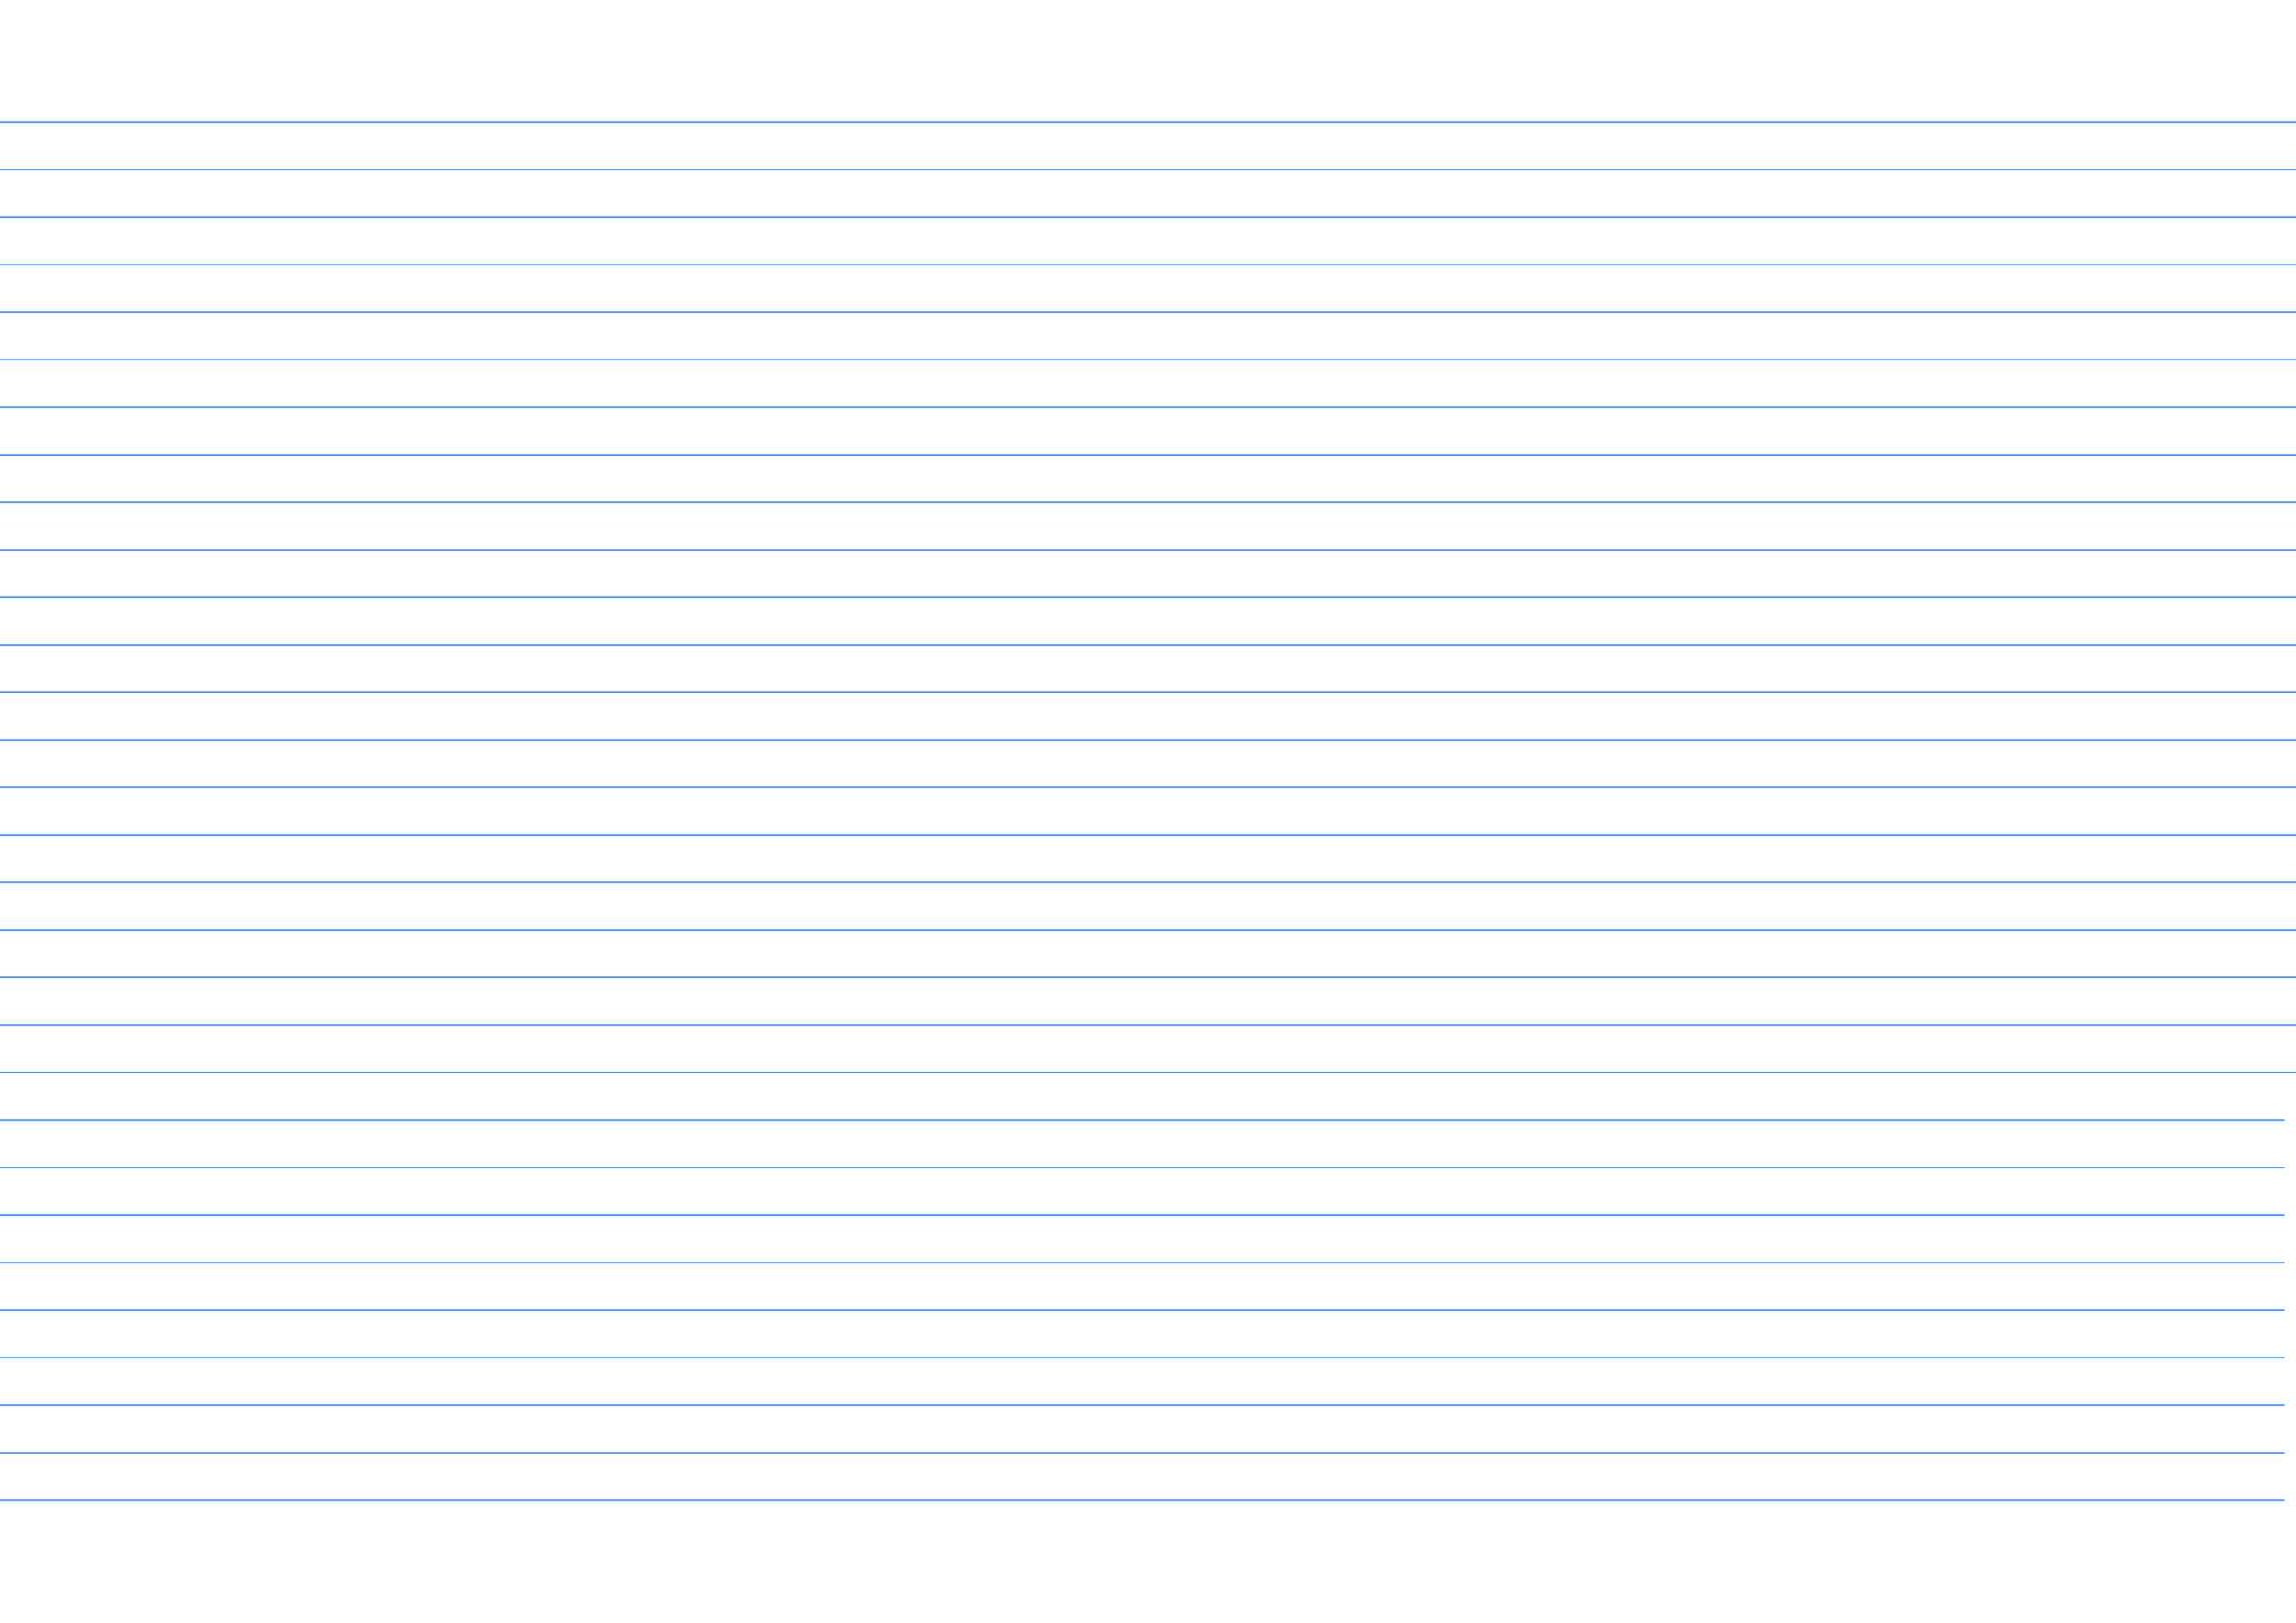 Notebook Paper Template For Word – Calep.midnightpig.co Regarding Notebook Paper Template For Word 2010